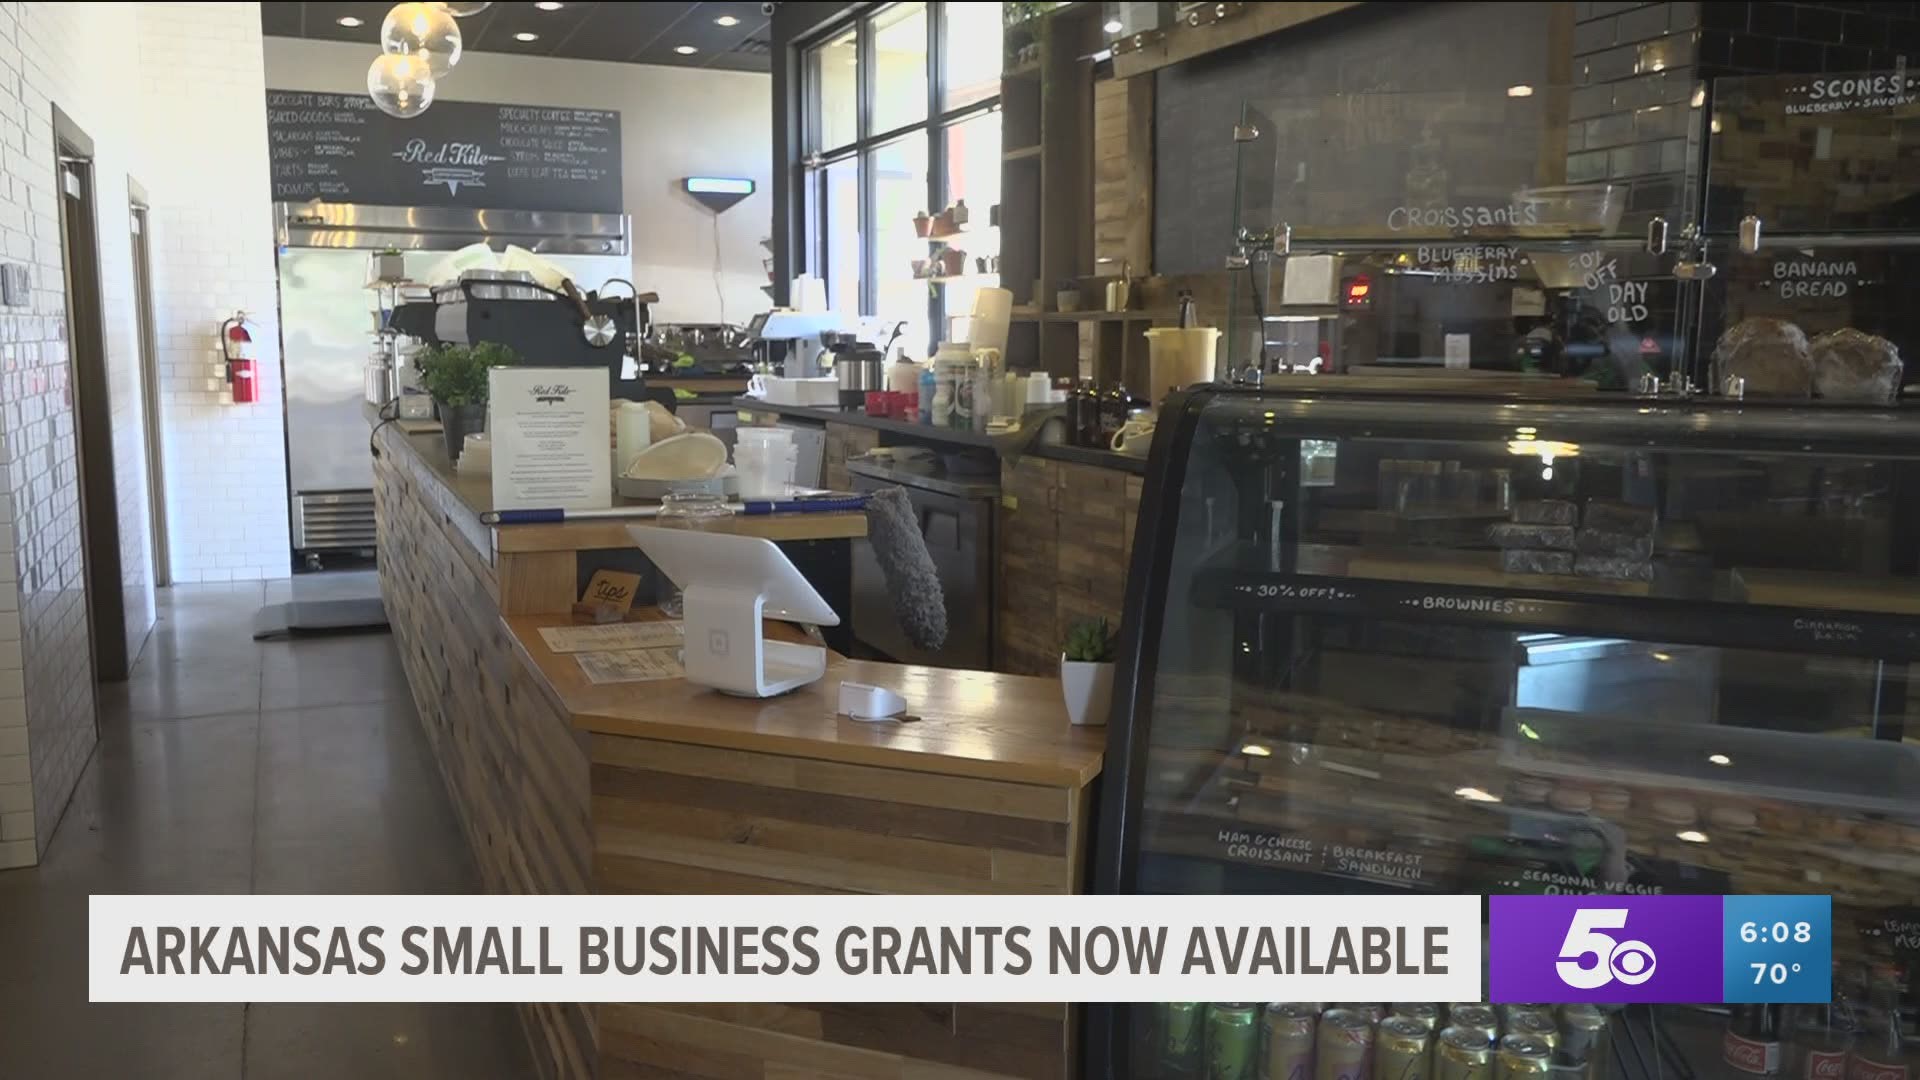 Arkansas small business grants now available